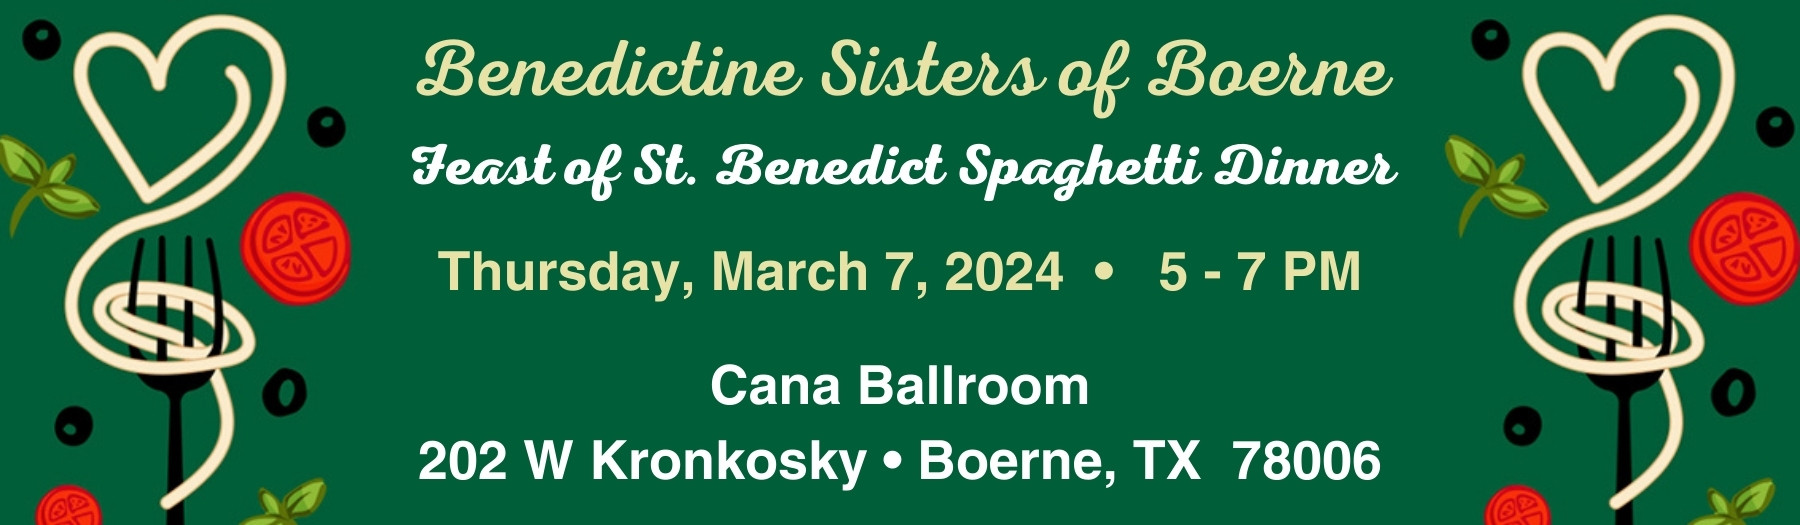 Header for the spaghetti dinner Thursday March 7 2025 at 202 W Kronosky Boerne, TX 78006 from 5pm to 7pm